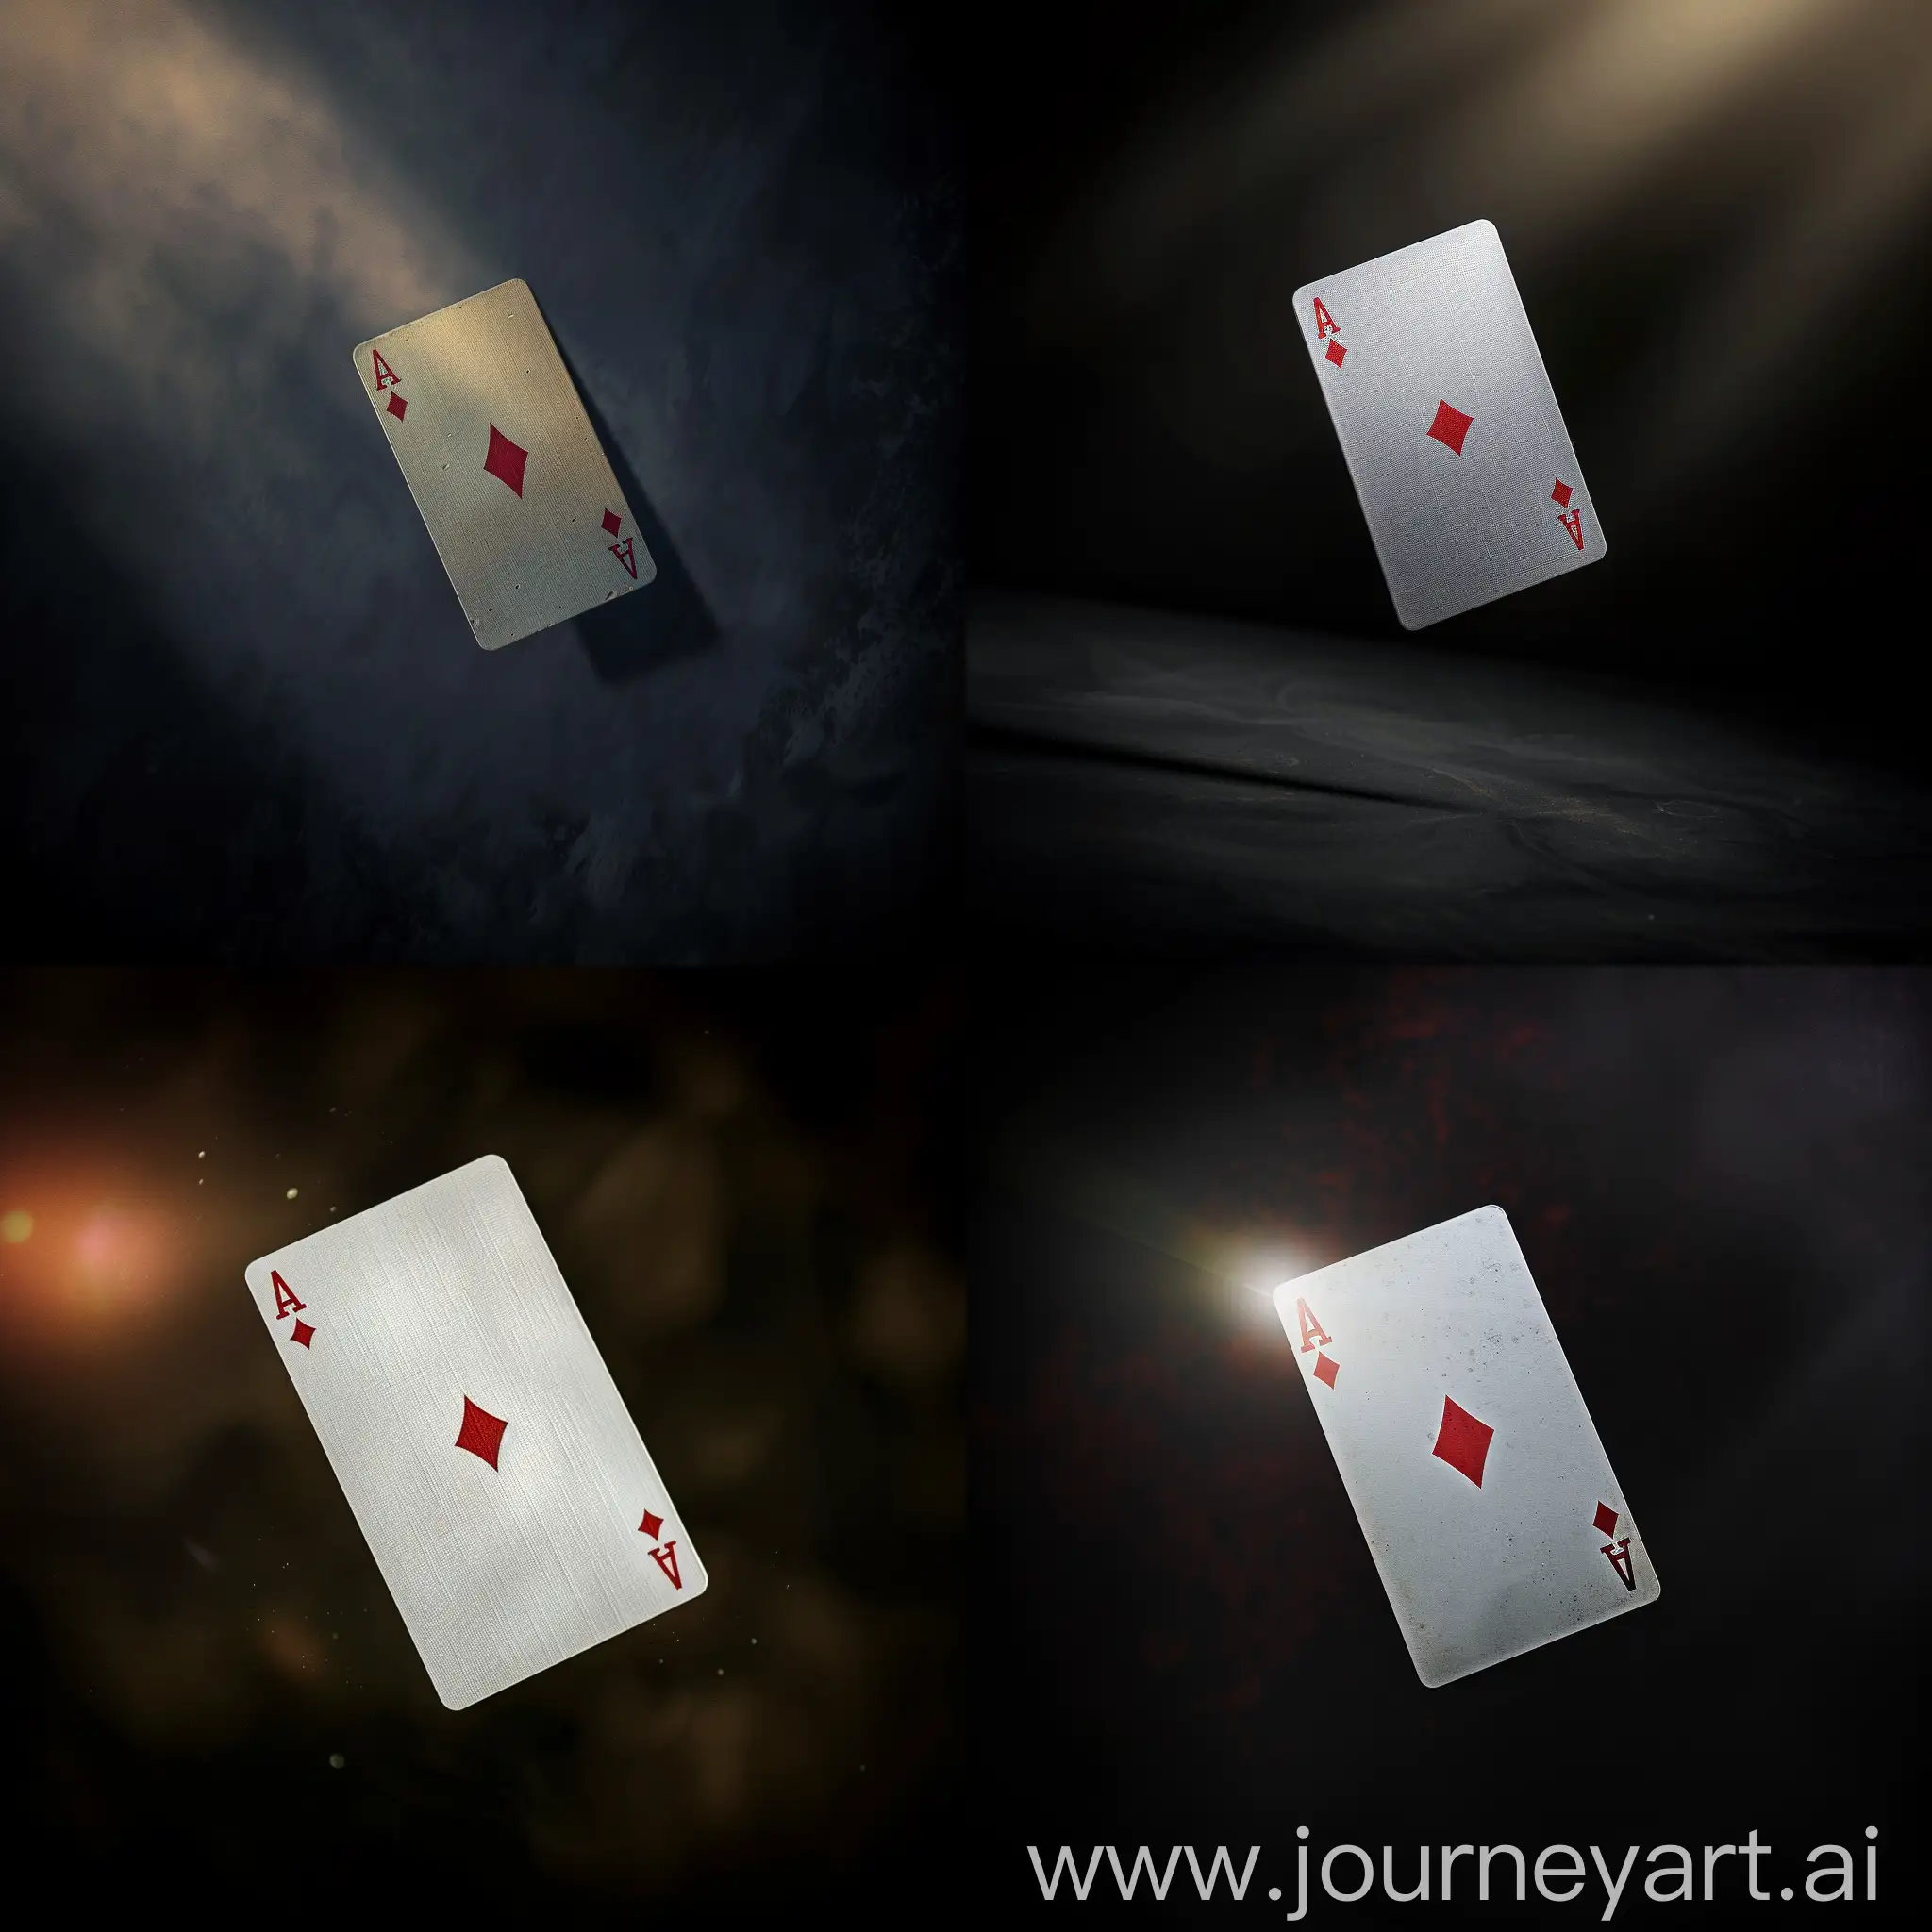 A playing card is floating in a dark, black room, with a soft light striking the card from the left side.